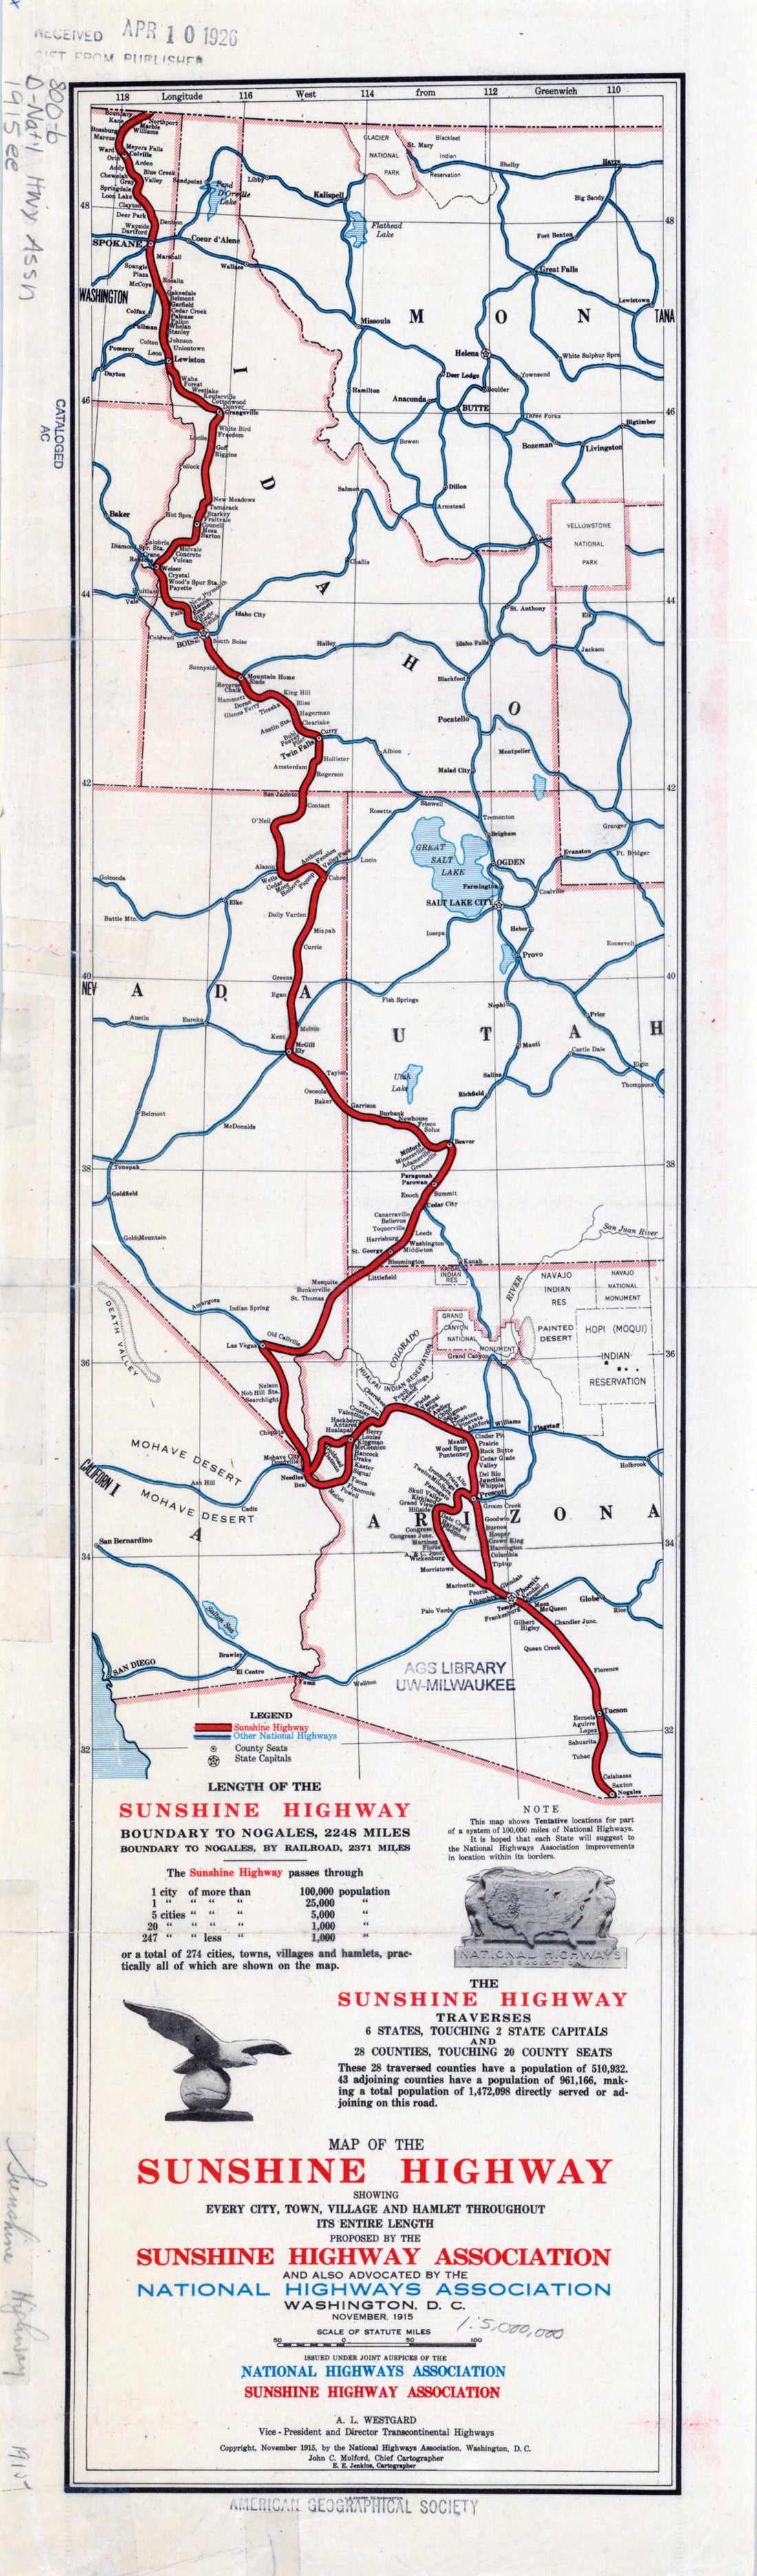 This old map of Map of the Sunshine Highway. (Map of the Sunshine Highway: Showing Every City, Town, Village and Hamlet Throughout Its Entire Length) from 1915 was created by E. E. Jenkins, John C. Mulford,  National Highways Association,  Sunshine Highw